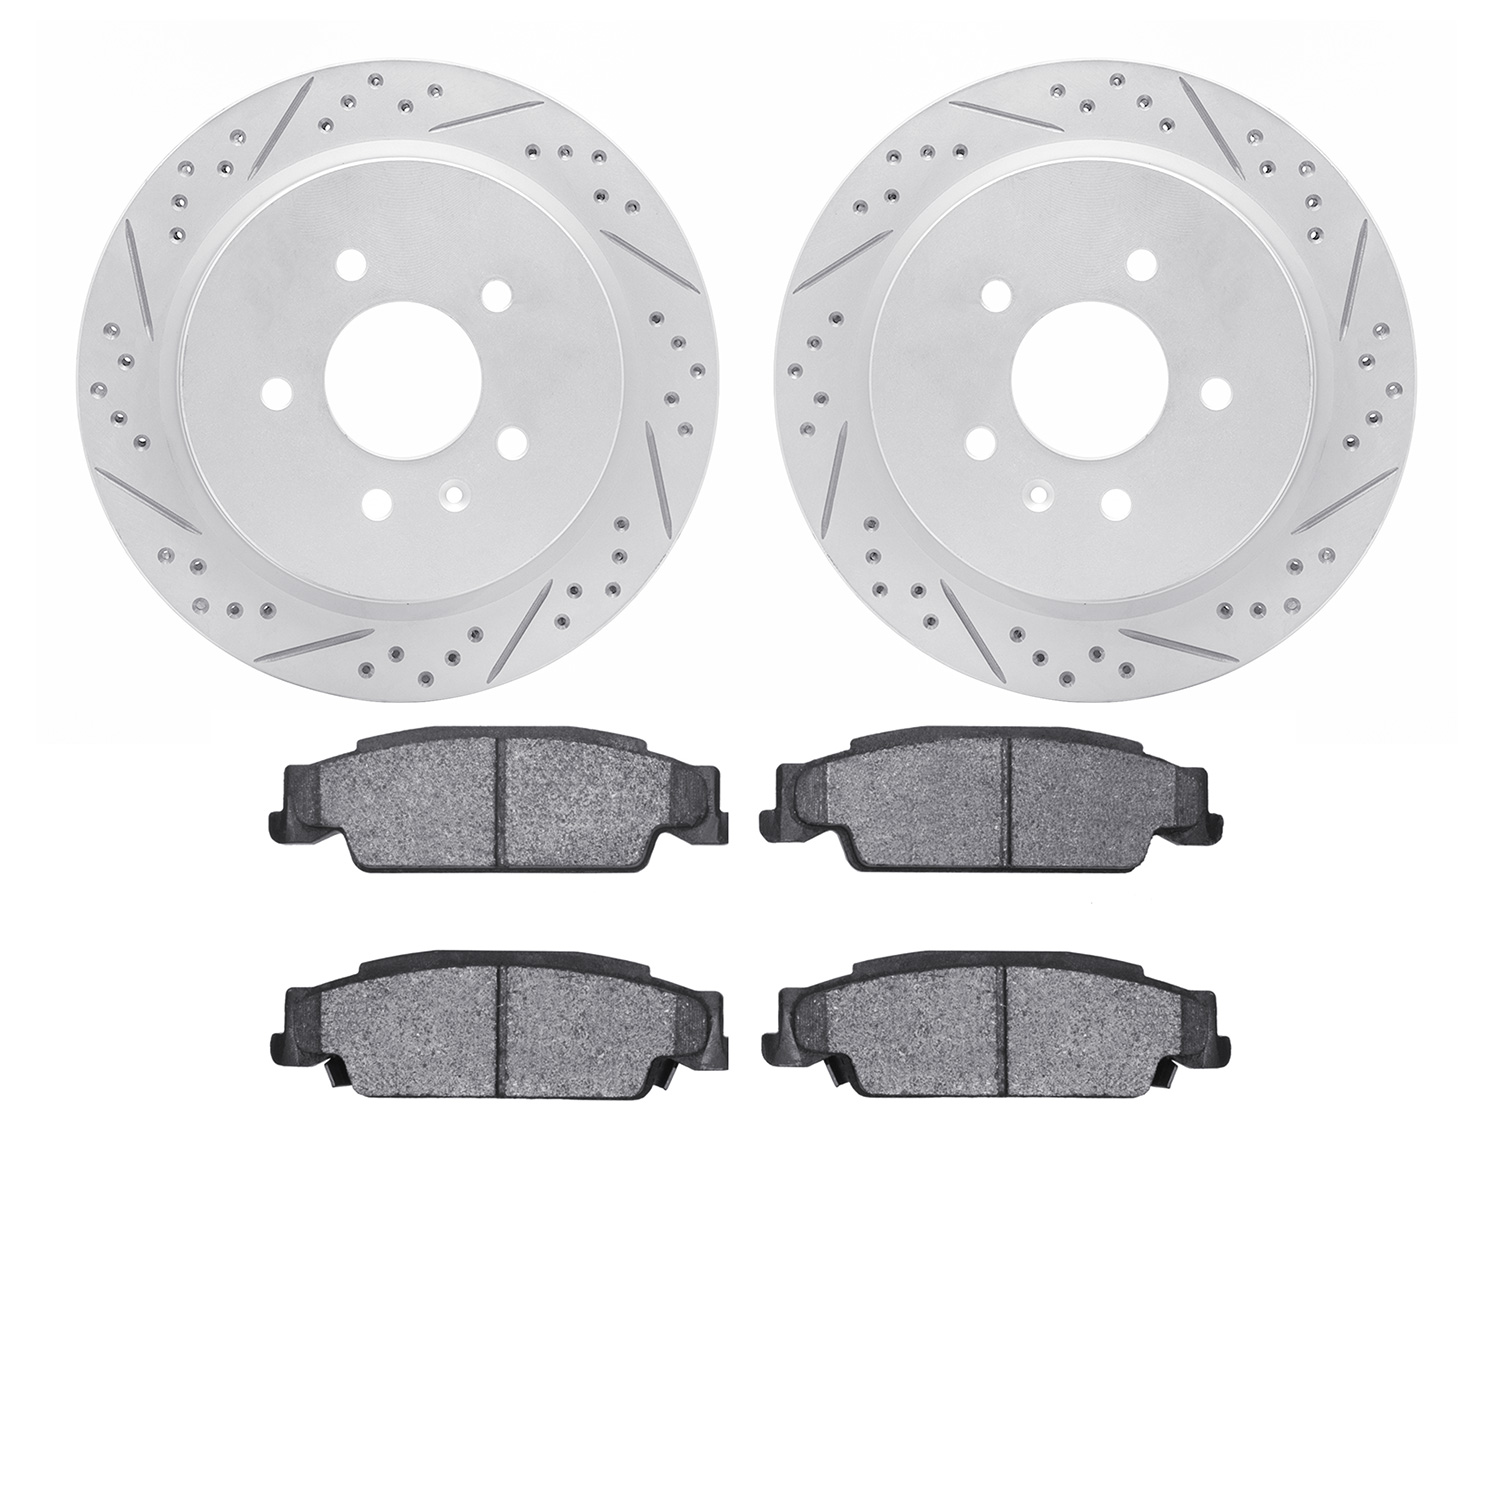 2502-46007 Geoperformance Drilled/Slotted Rotors w/5000 Advanced Brake Pads Kit, 2003-2011 GM, Position: Rear